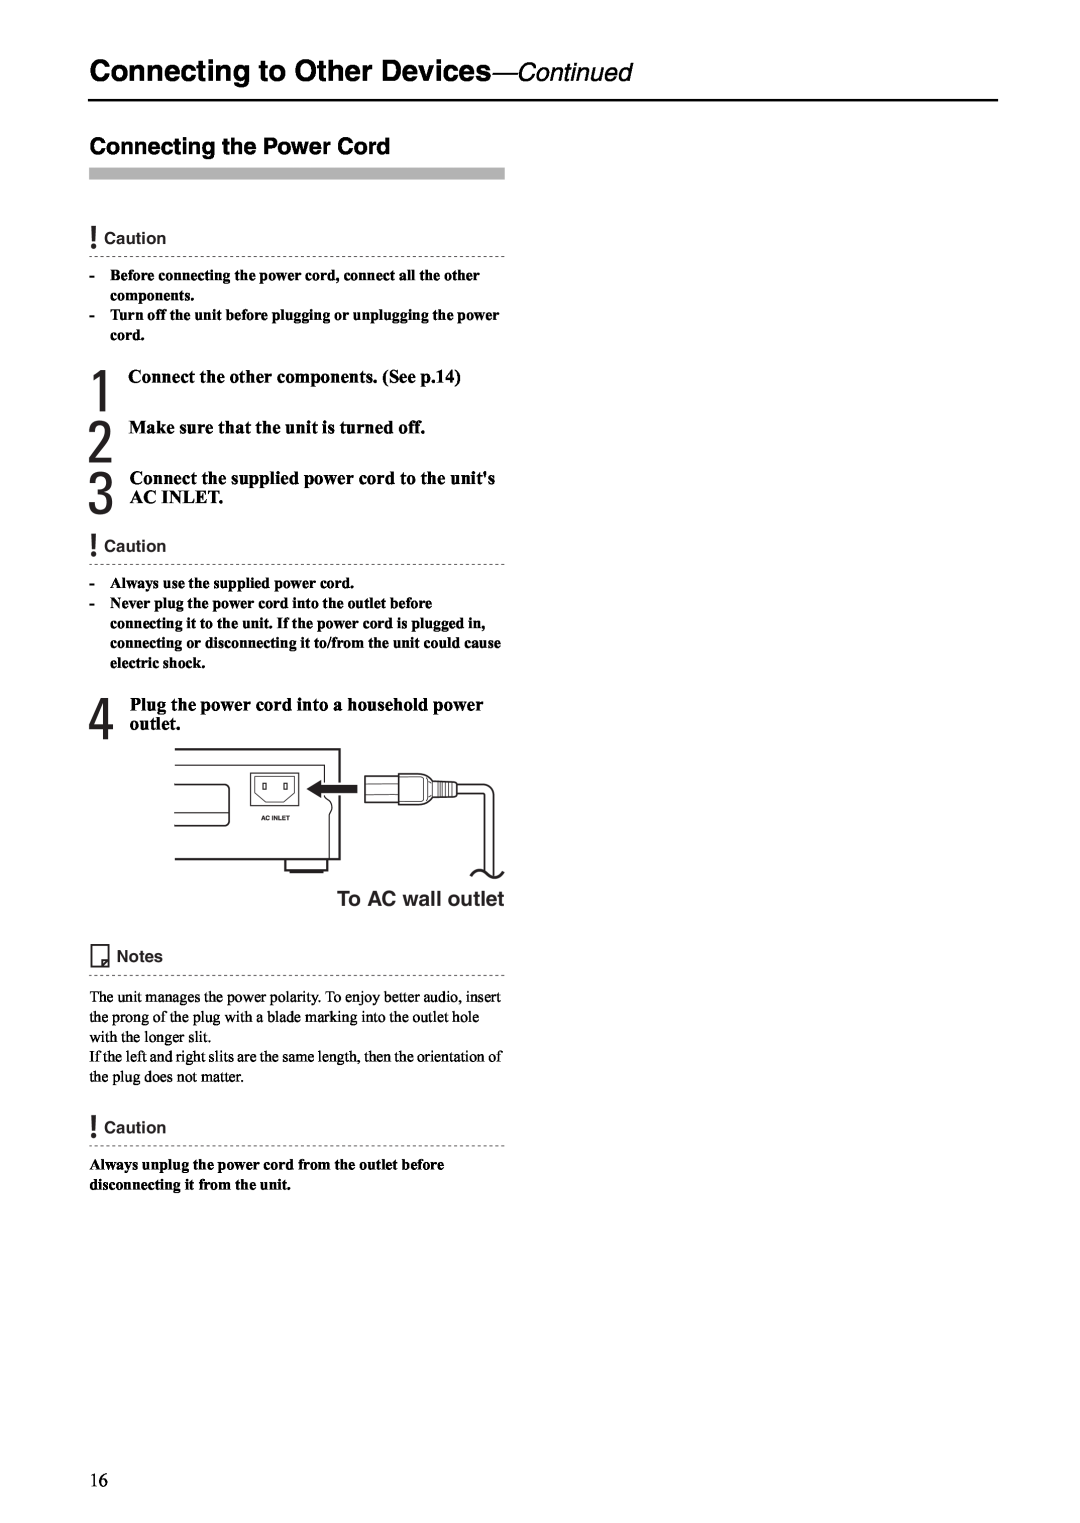 Onkyo C-S5VL instruction manual Connecting the Power Cord, To AC wall outlet, Connecting to Other Devices-Continued 